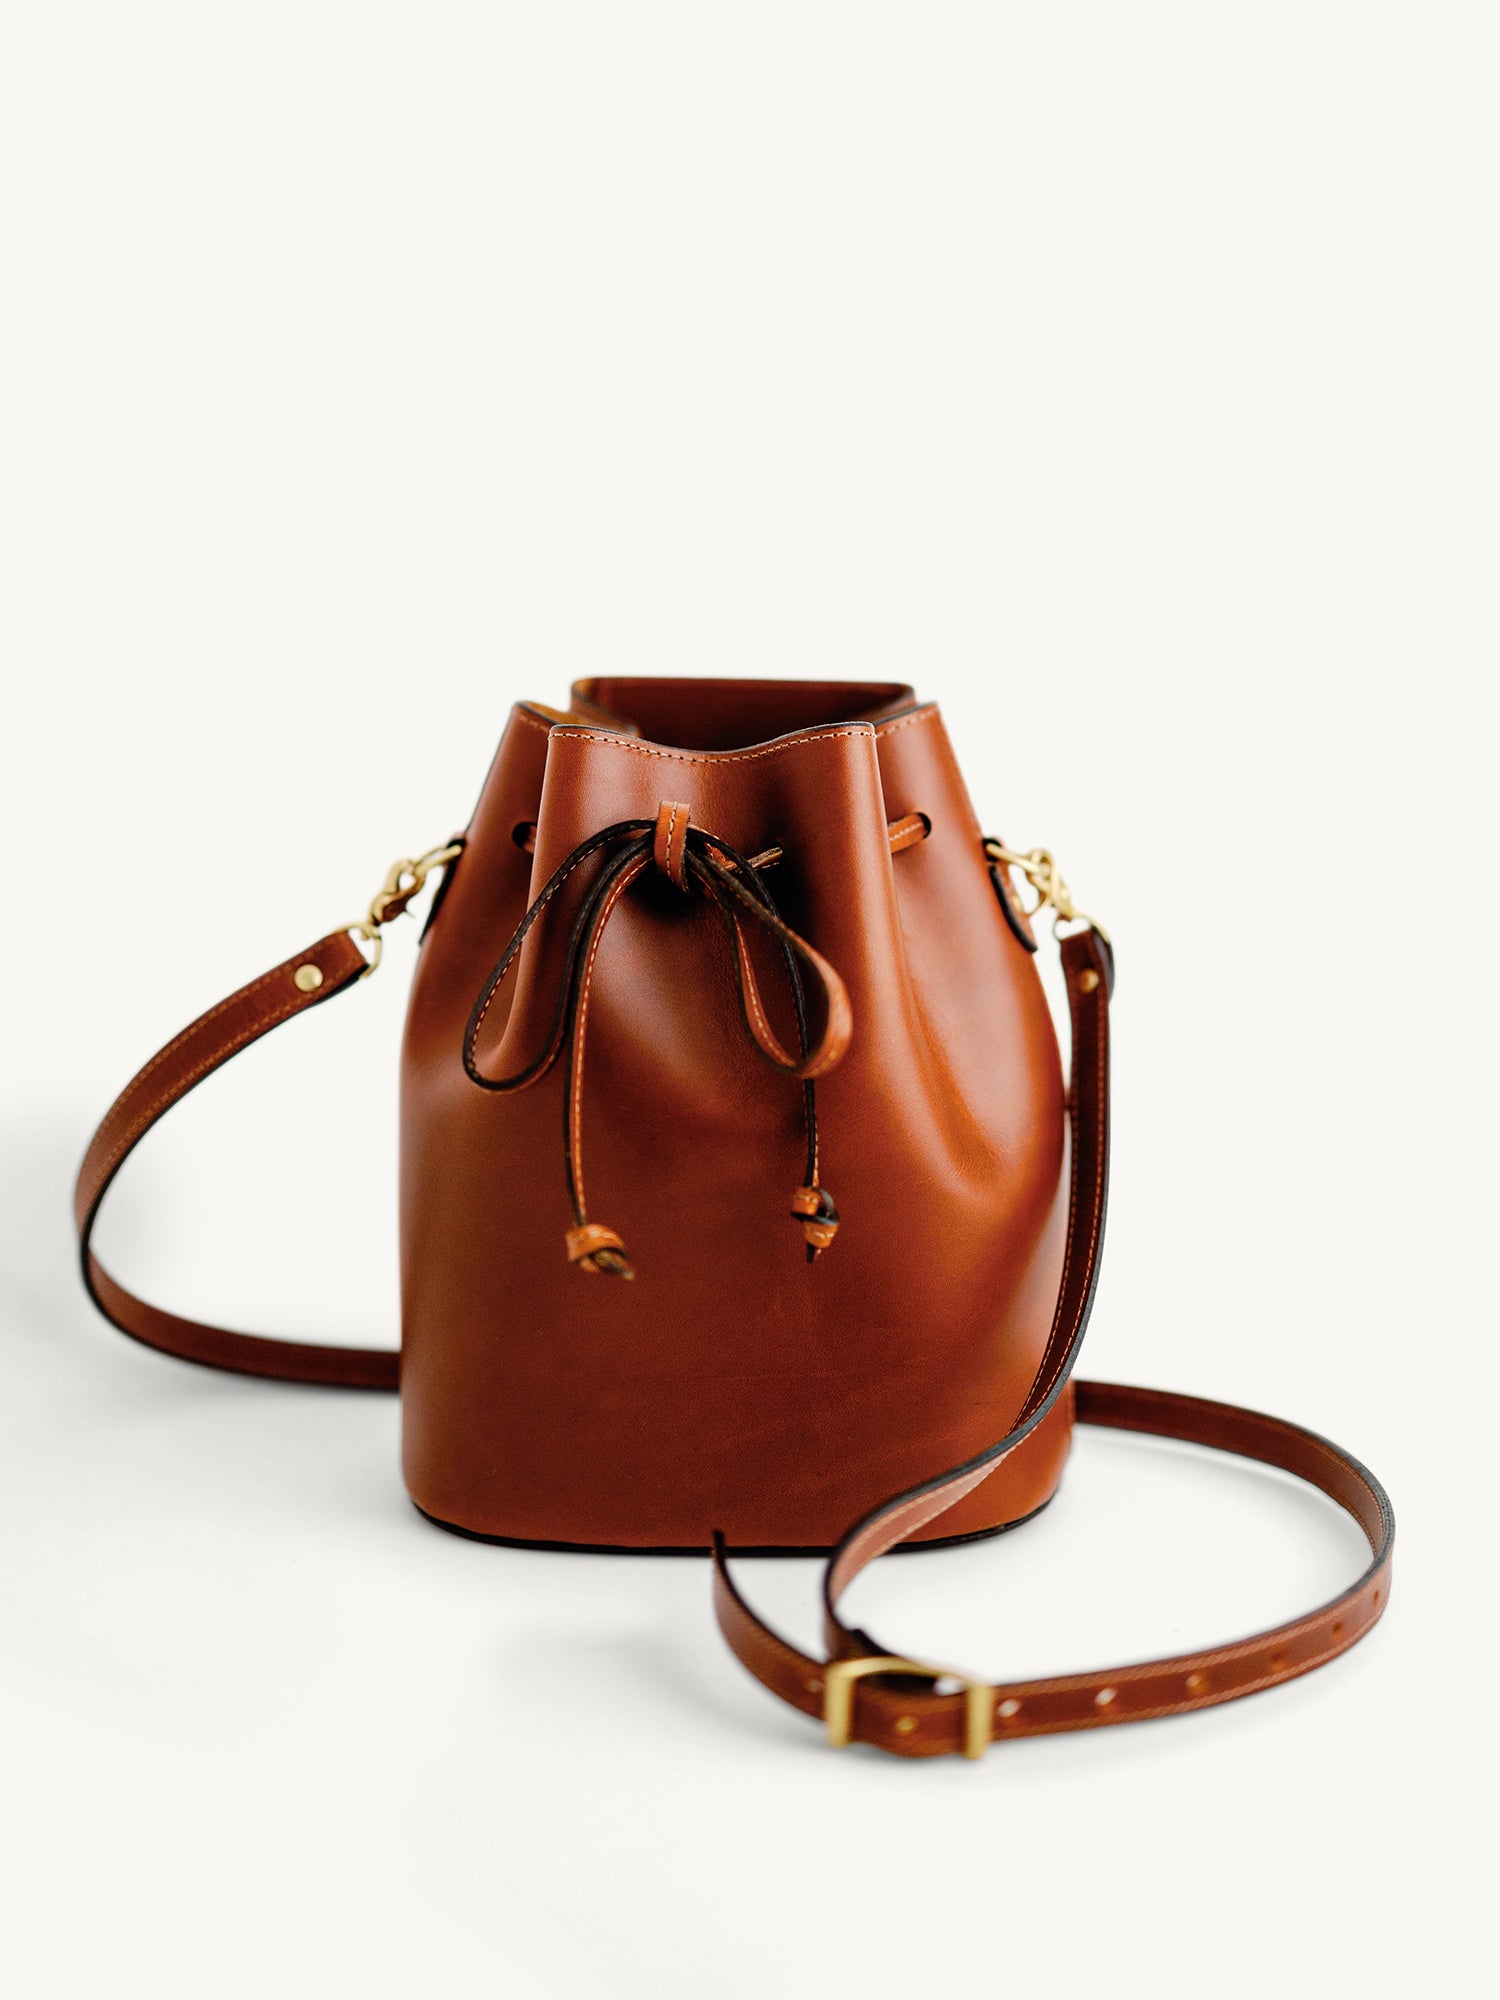 Designer Leather Crossbody Bag: High Quality Embellished Shoulder Purse  With Bucket Style Hand Strap For Women From Halou520, $40.39 | DHgate.Com